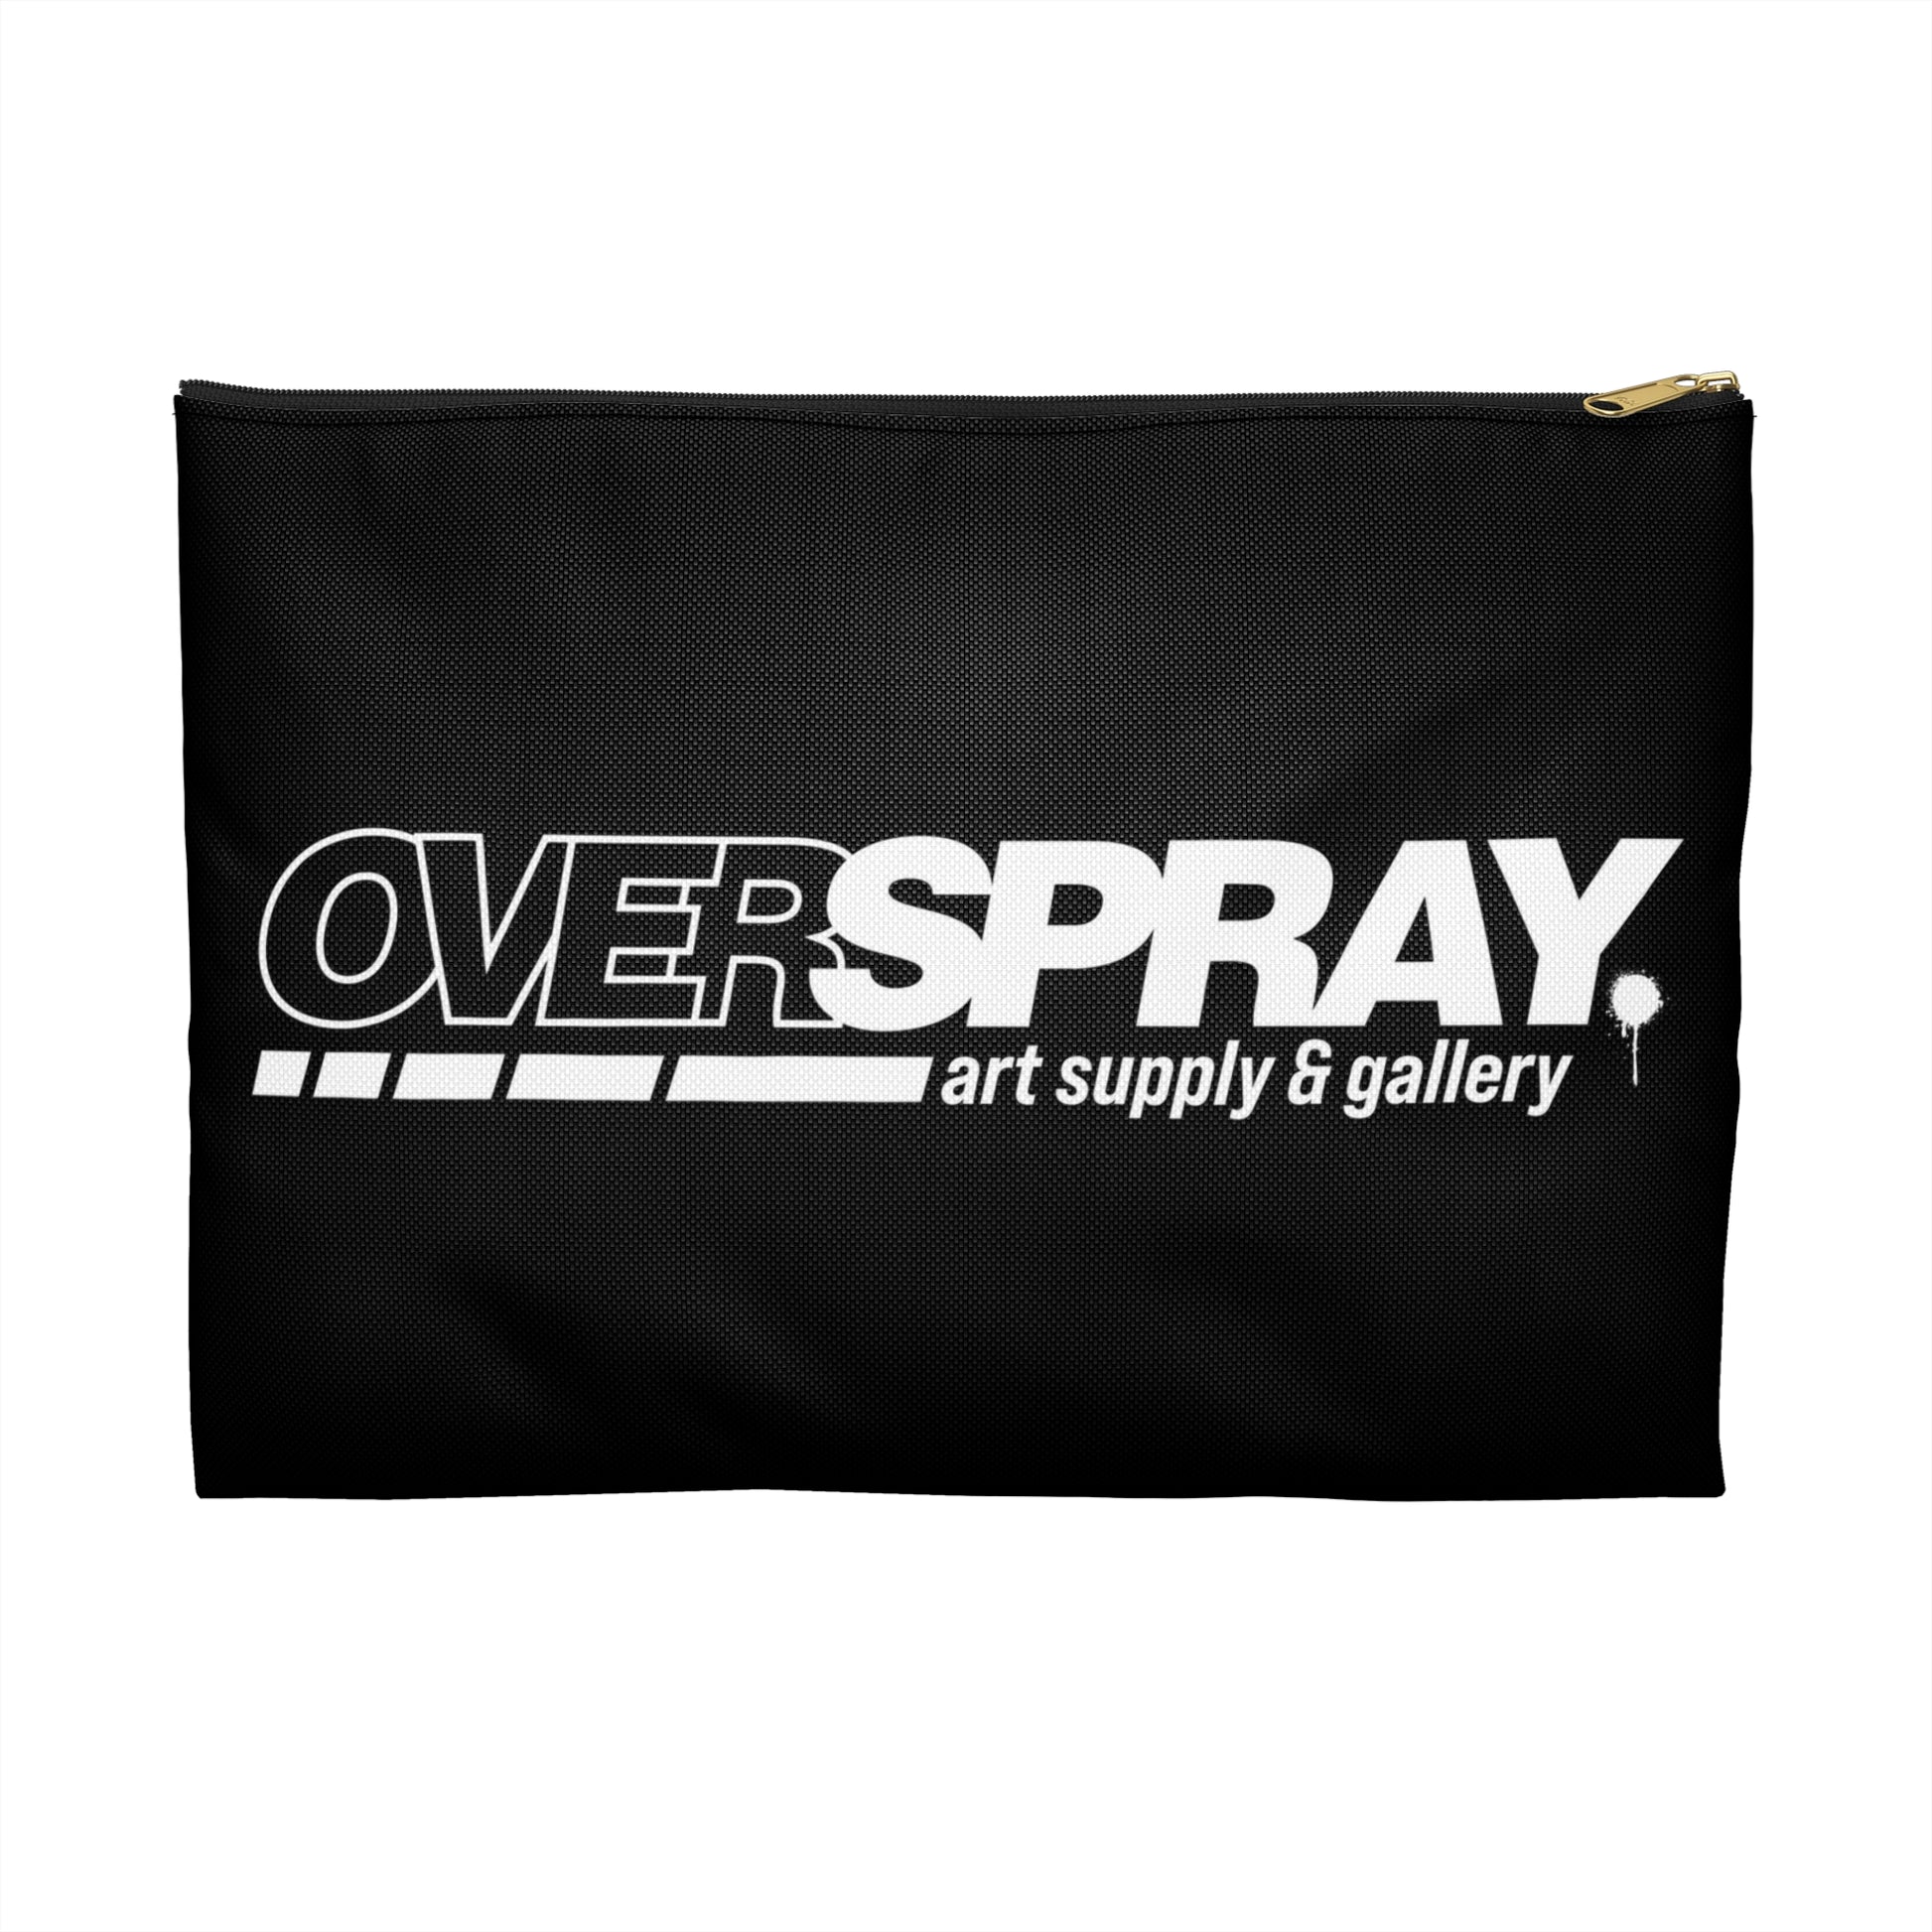 The front of a black pencil bag with a silver zipper, reads "Overspray Art Supply & Gallery" in white